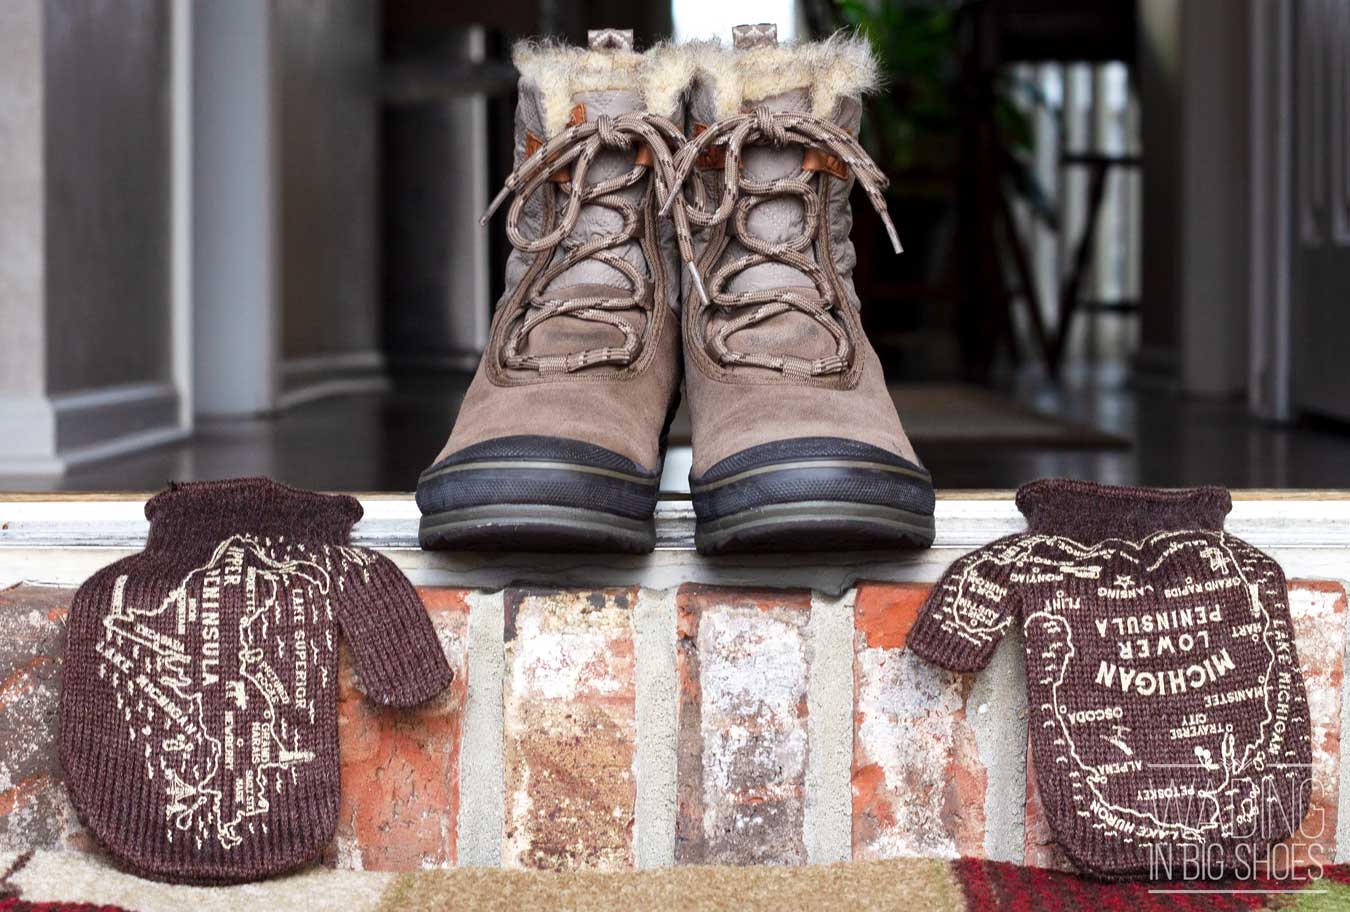 Getting Cozy At Home With Michigan Mittens (via Wading in Big Shoes)